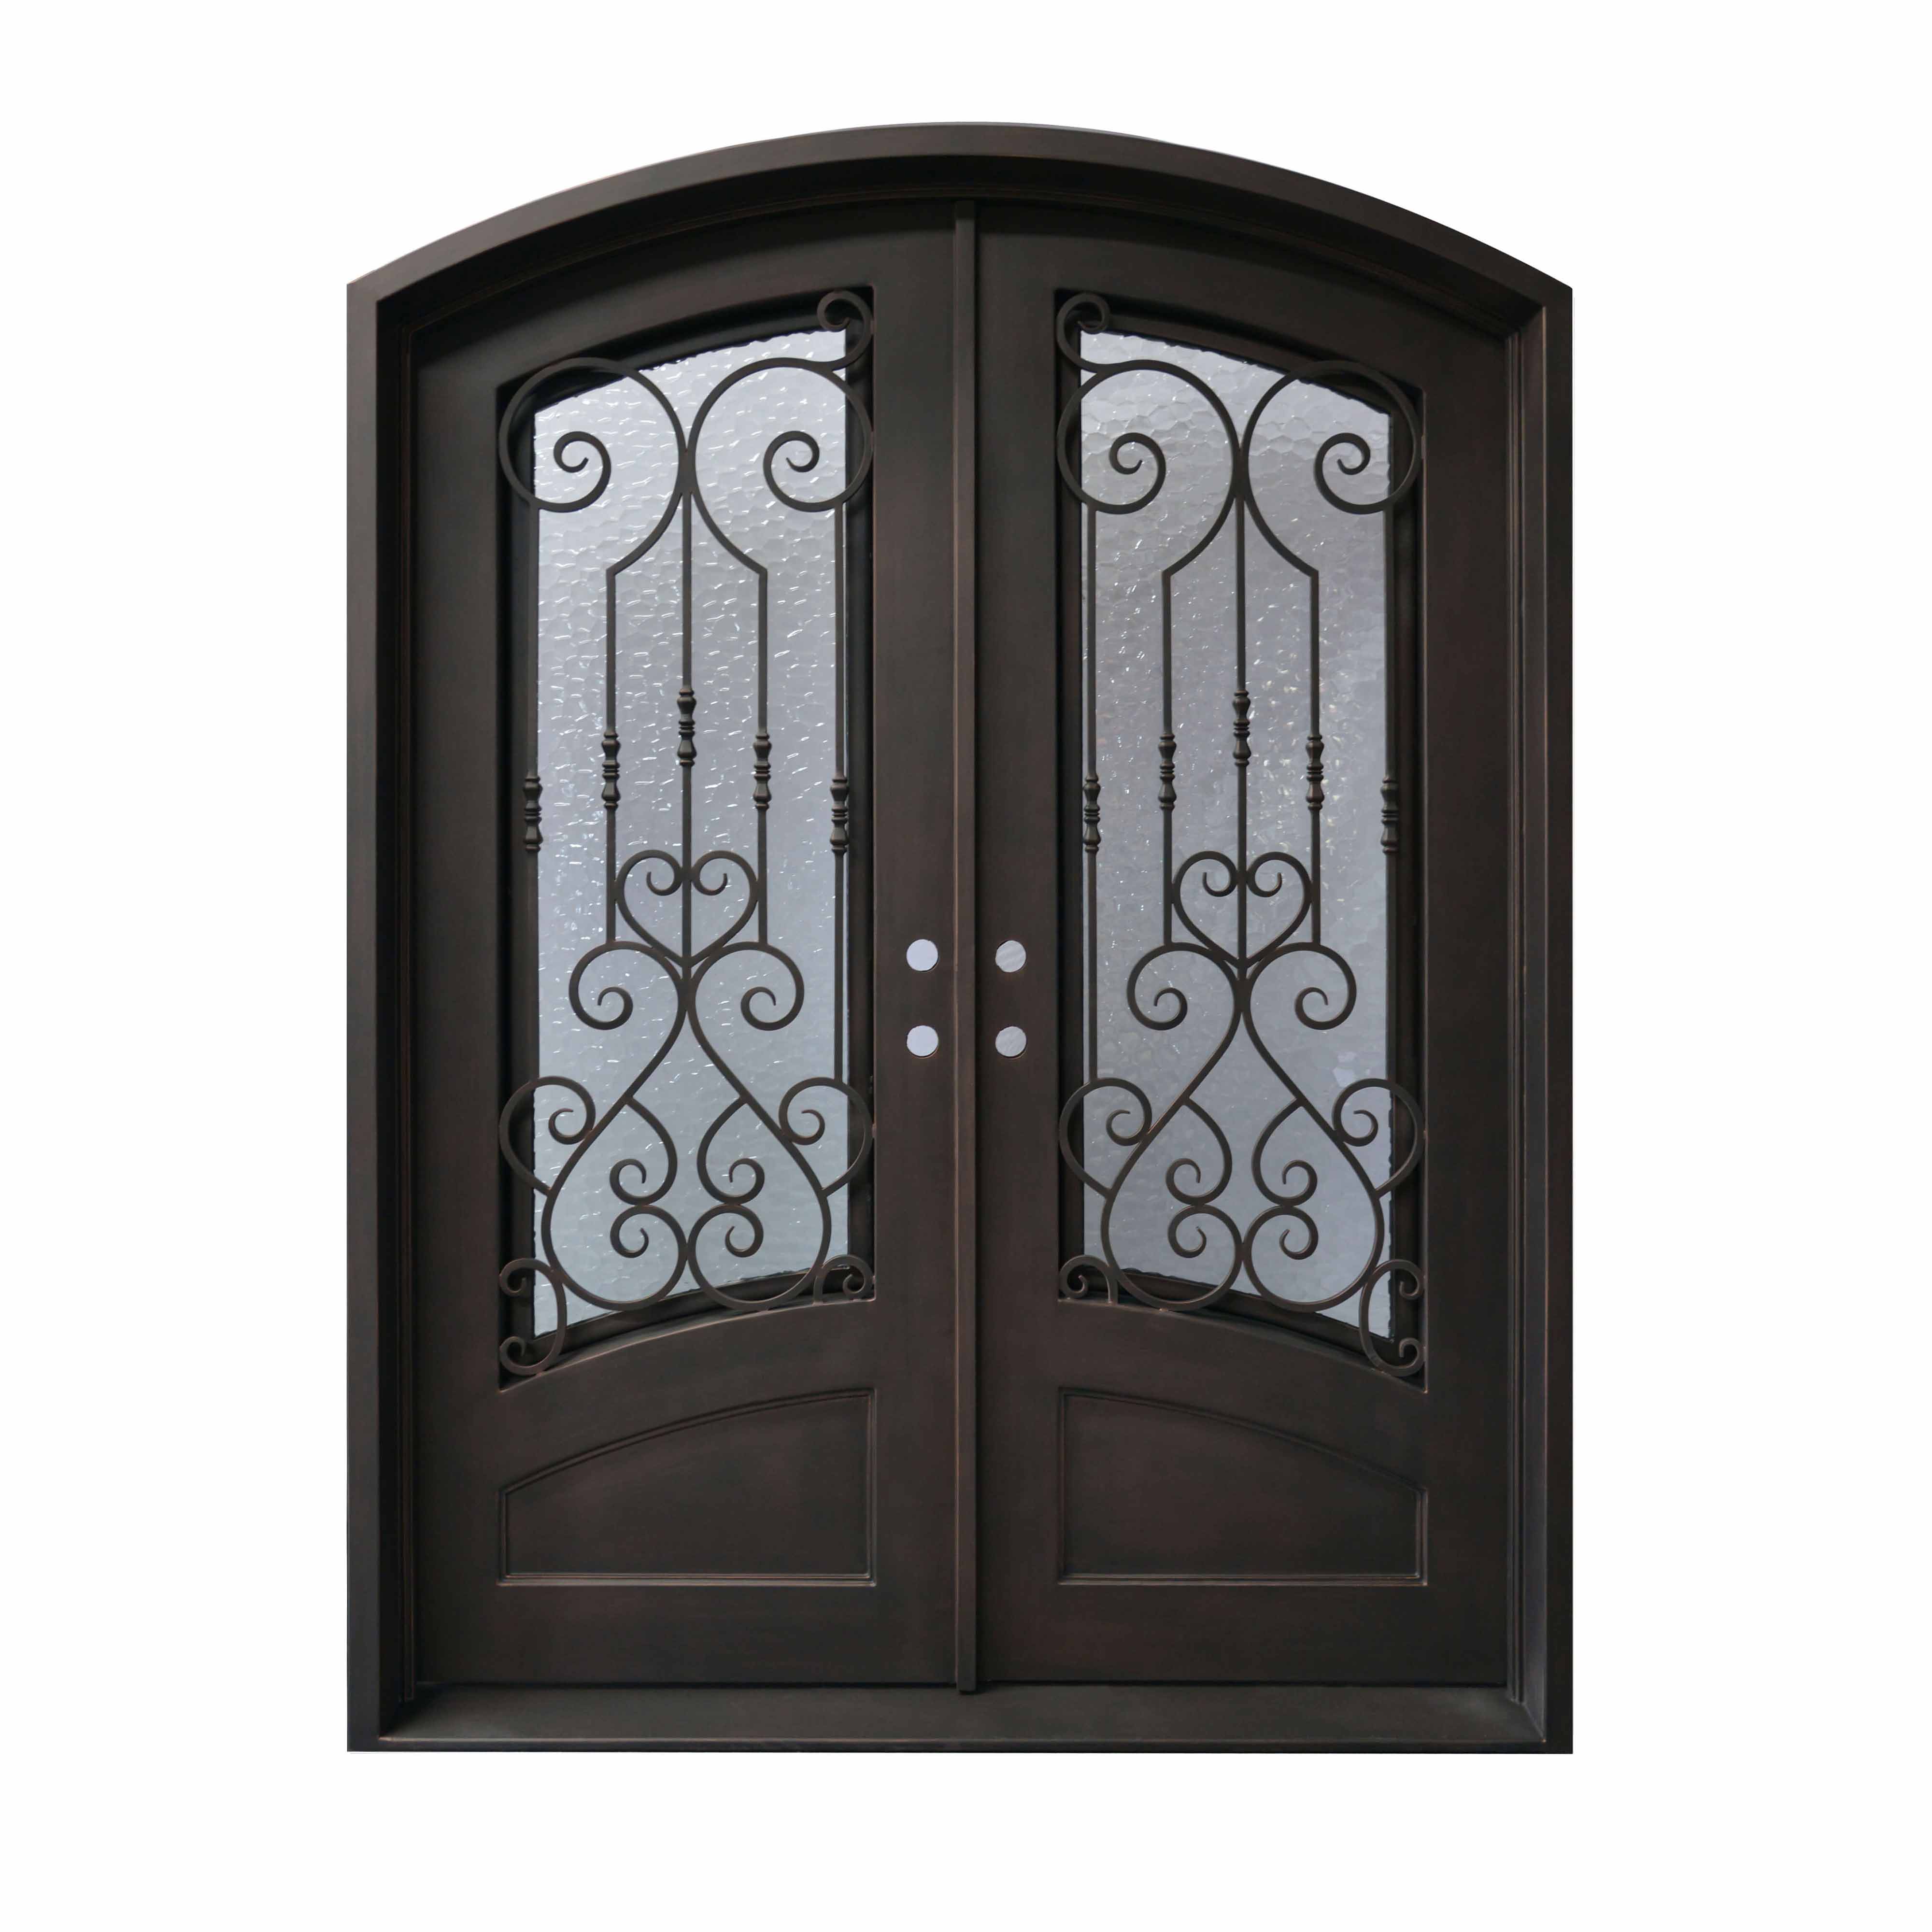 Handmade insulated wrought iron double door with double pane frosted glass